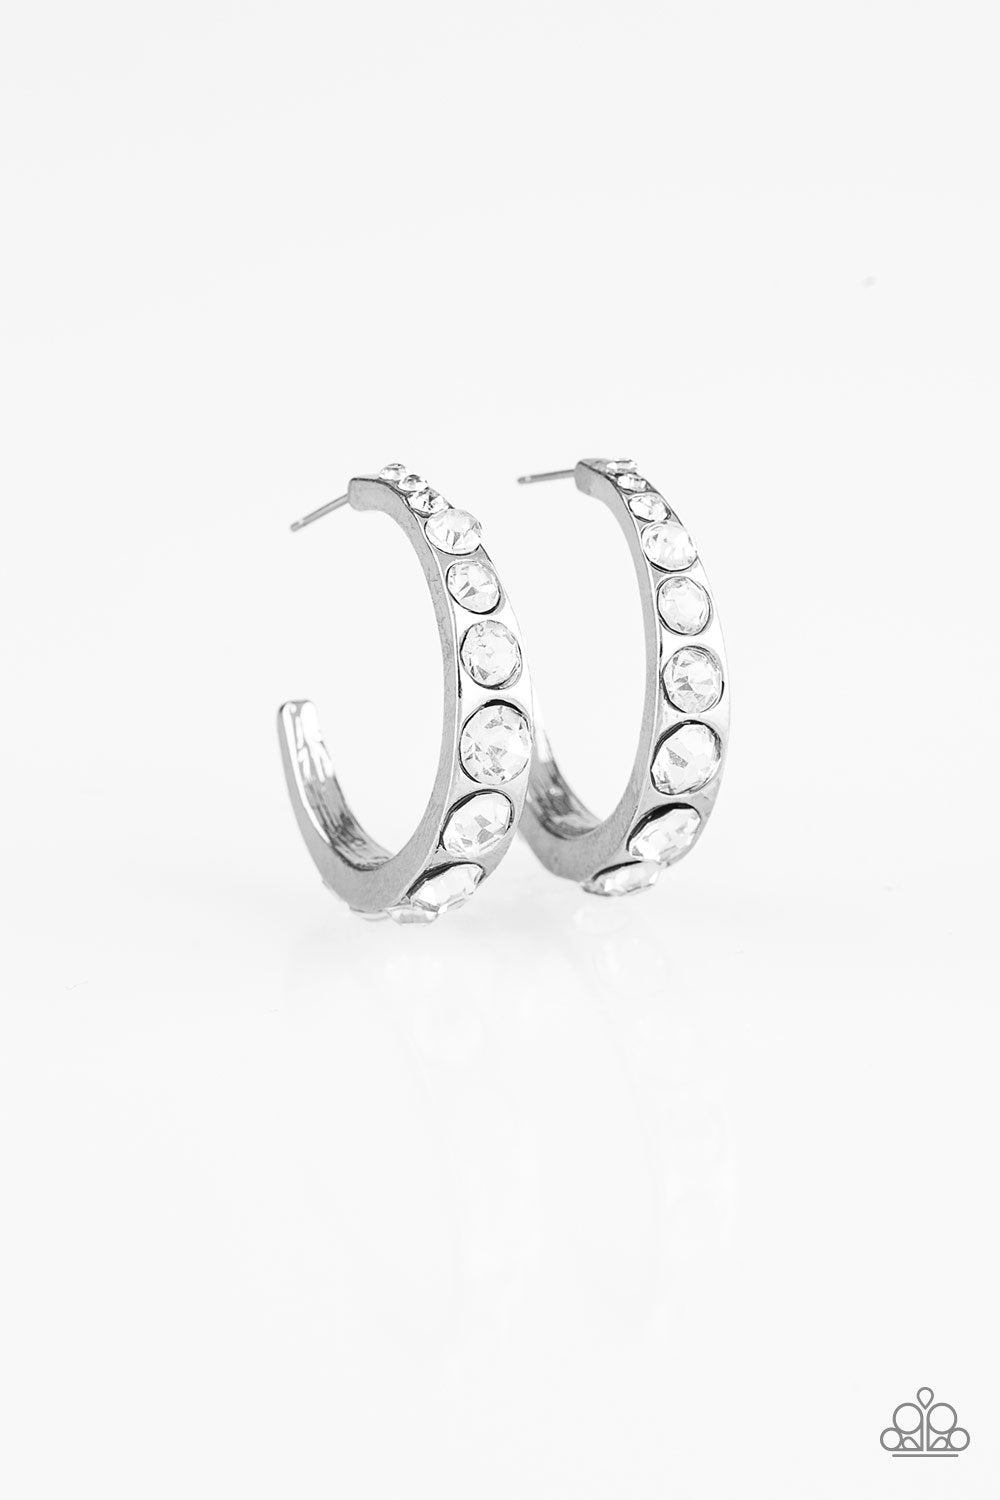 Welcome to Glam Town Silver and White Rhinestone Hoop Earrings - Paparazzi Accessories-CarasShop.com - $5 Jewelry by Cara Jewels